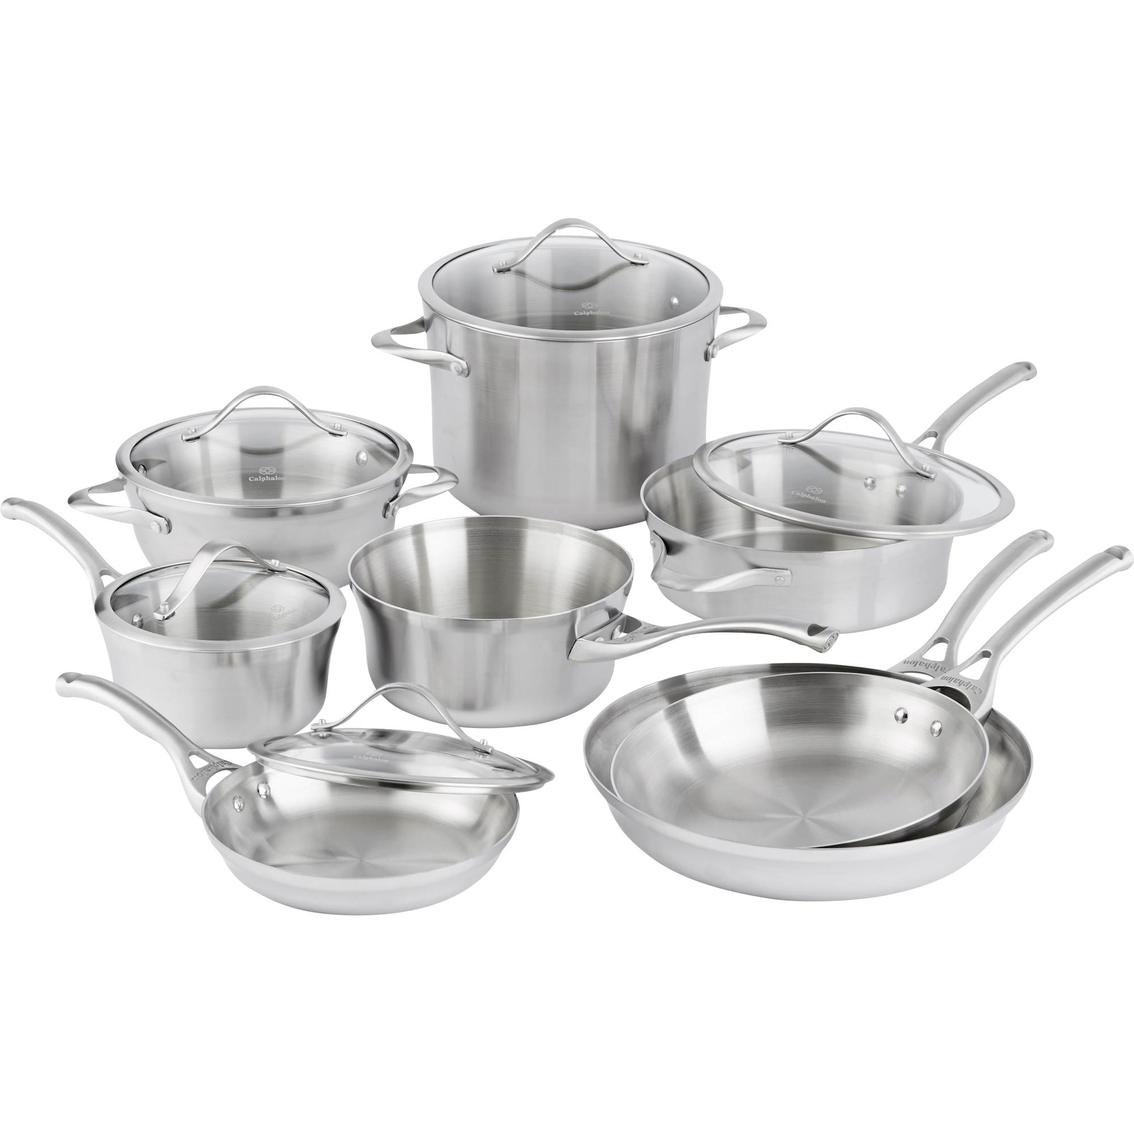 Calphalon Contemporary Stainless Steel 13 Pc. Cookware Set